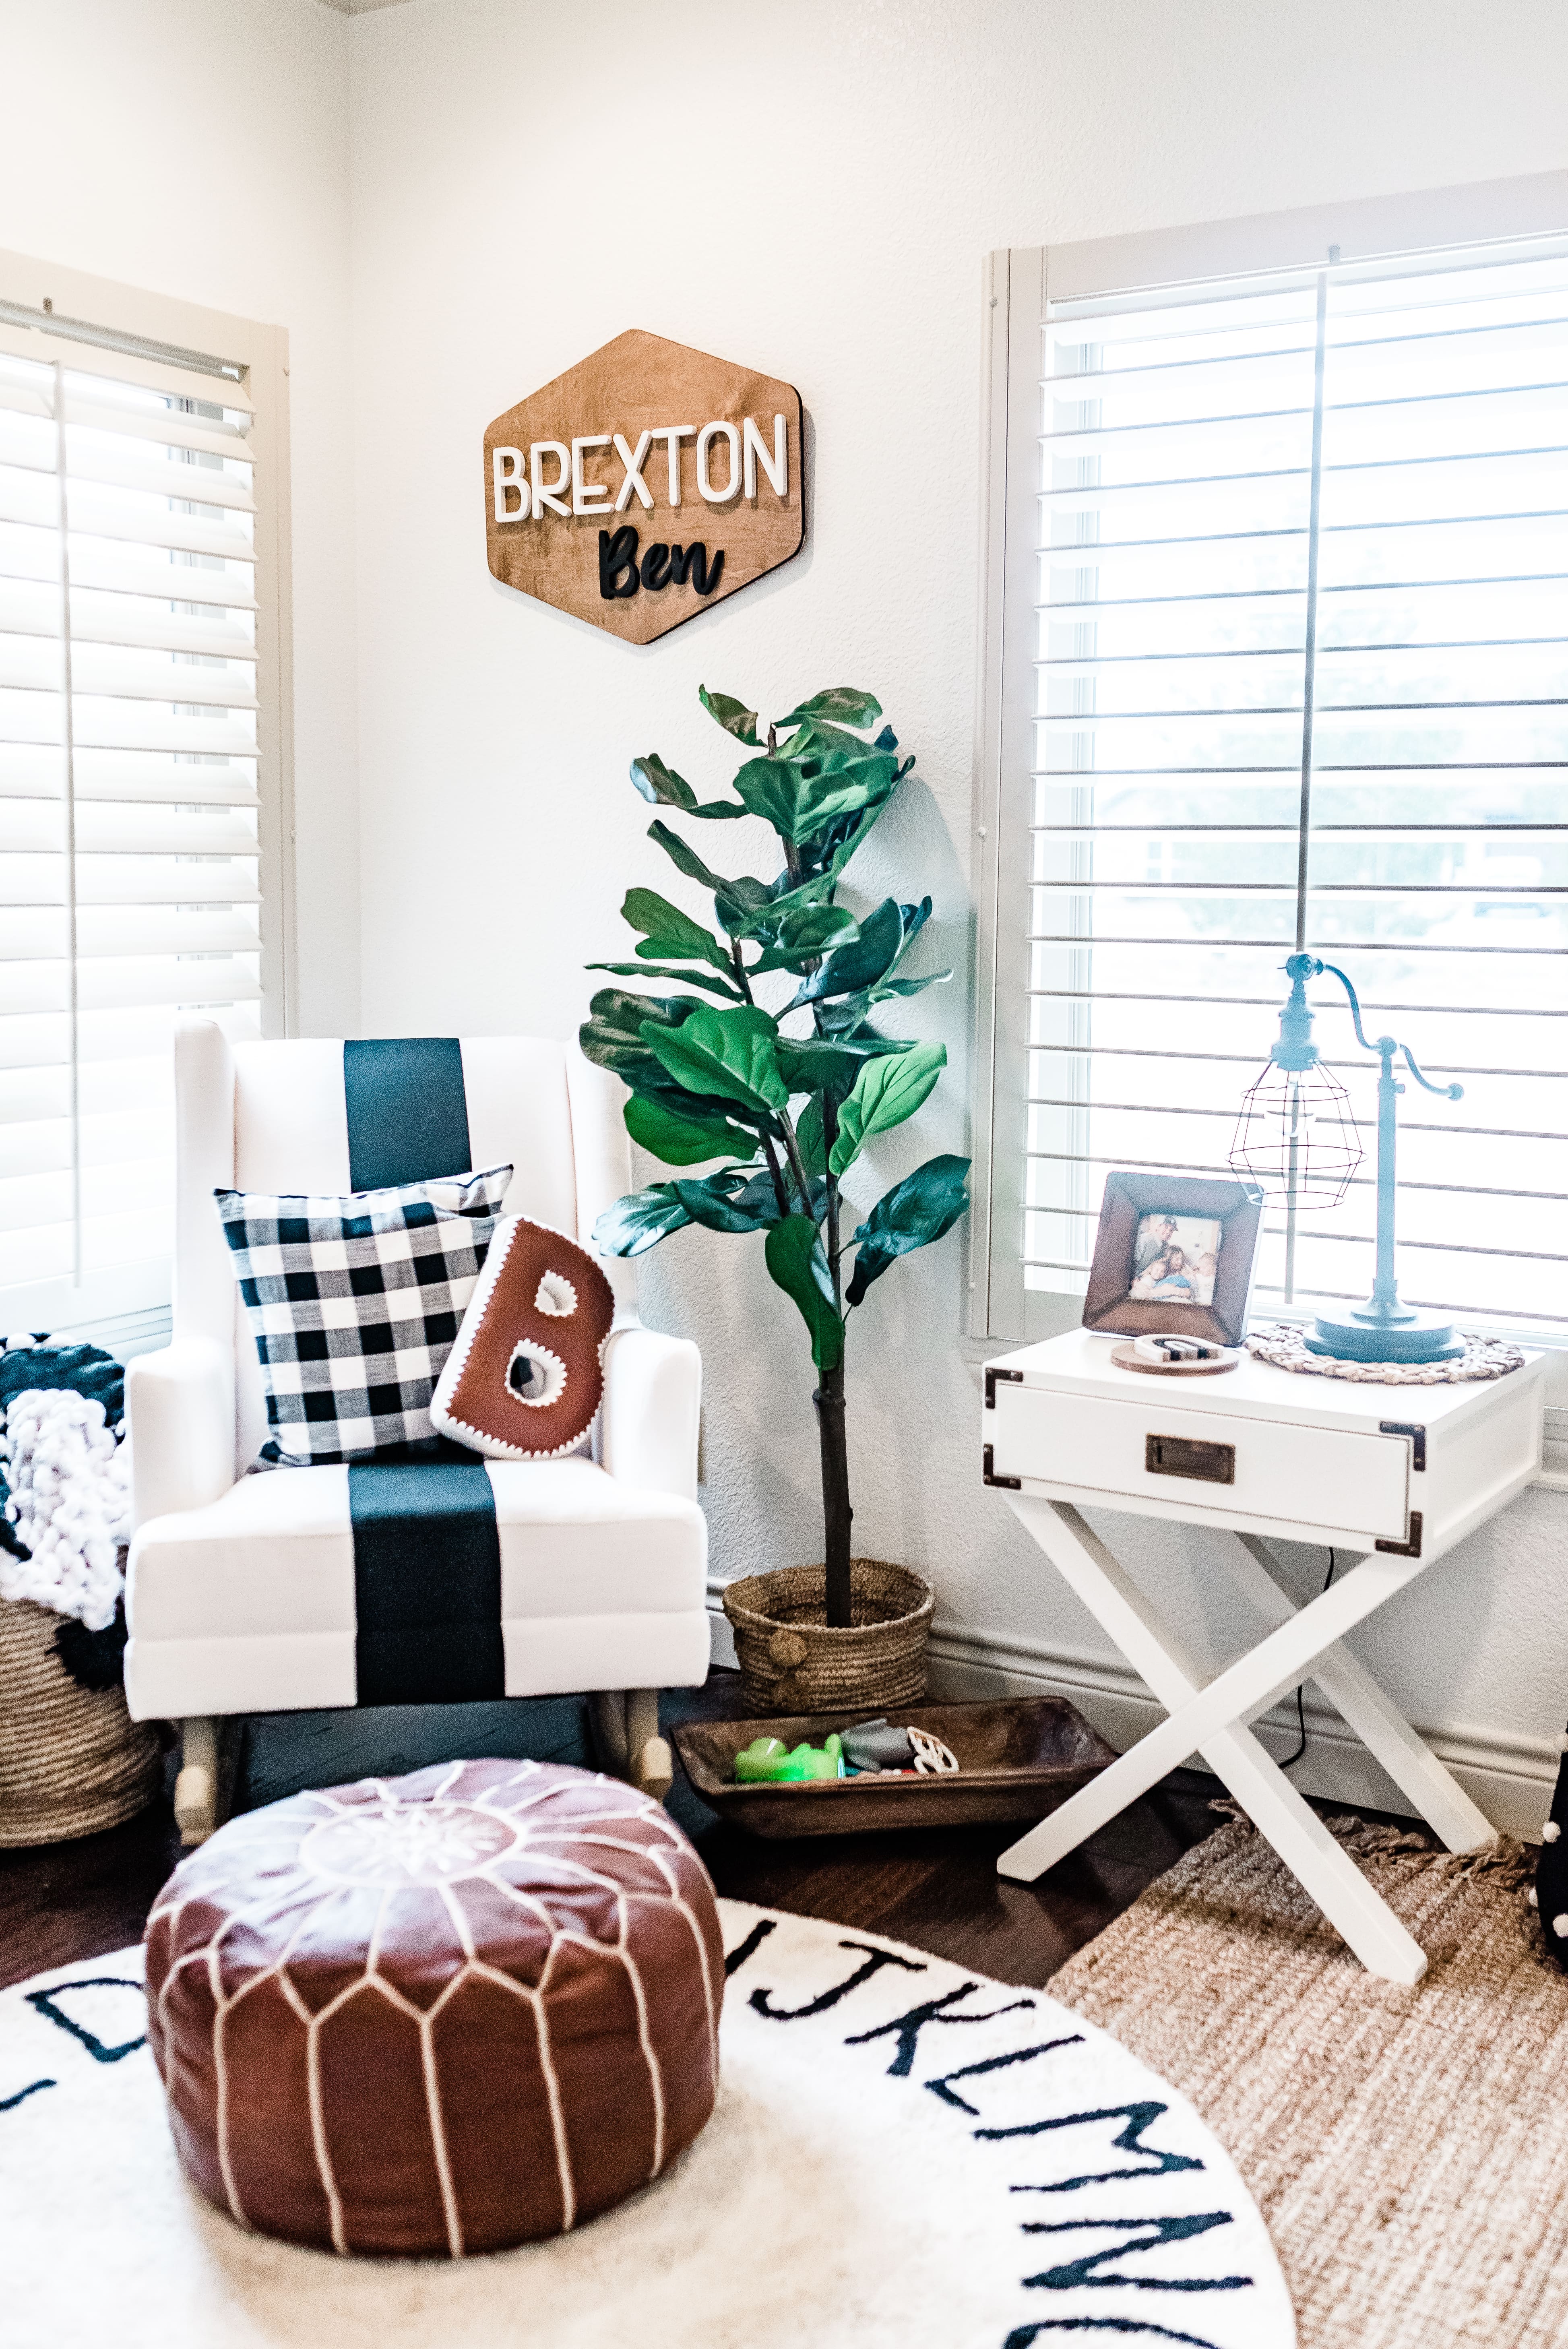 Life & Style Blogger Ashlee Nichold shares afforable nursery finds from Walmart. She makes her top 10 nursery furniture picks from the Walmart baby sale.